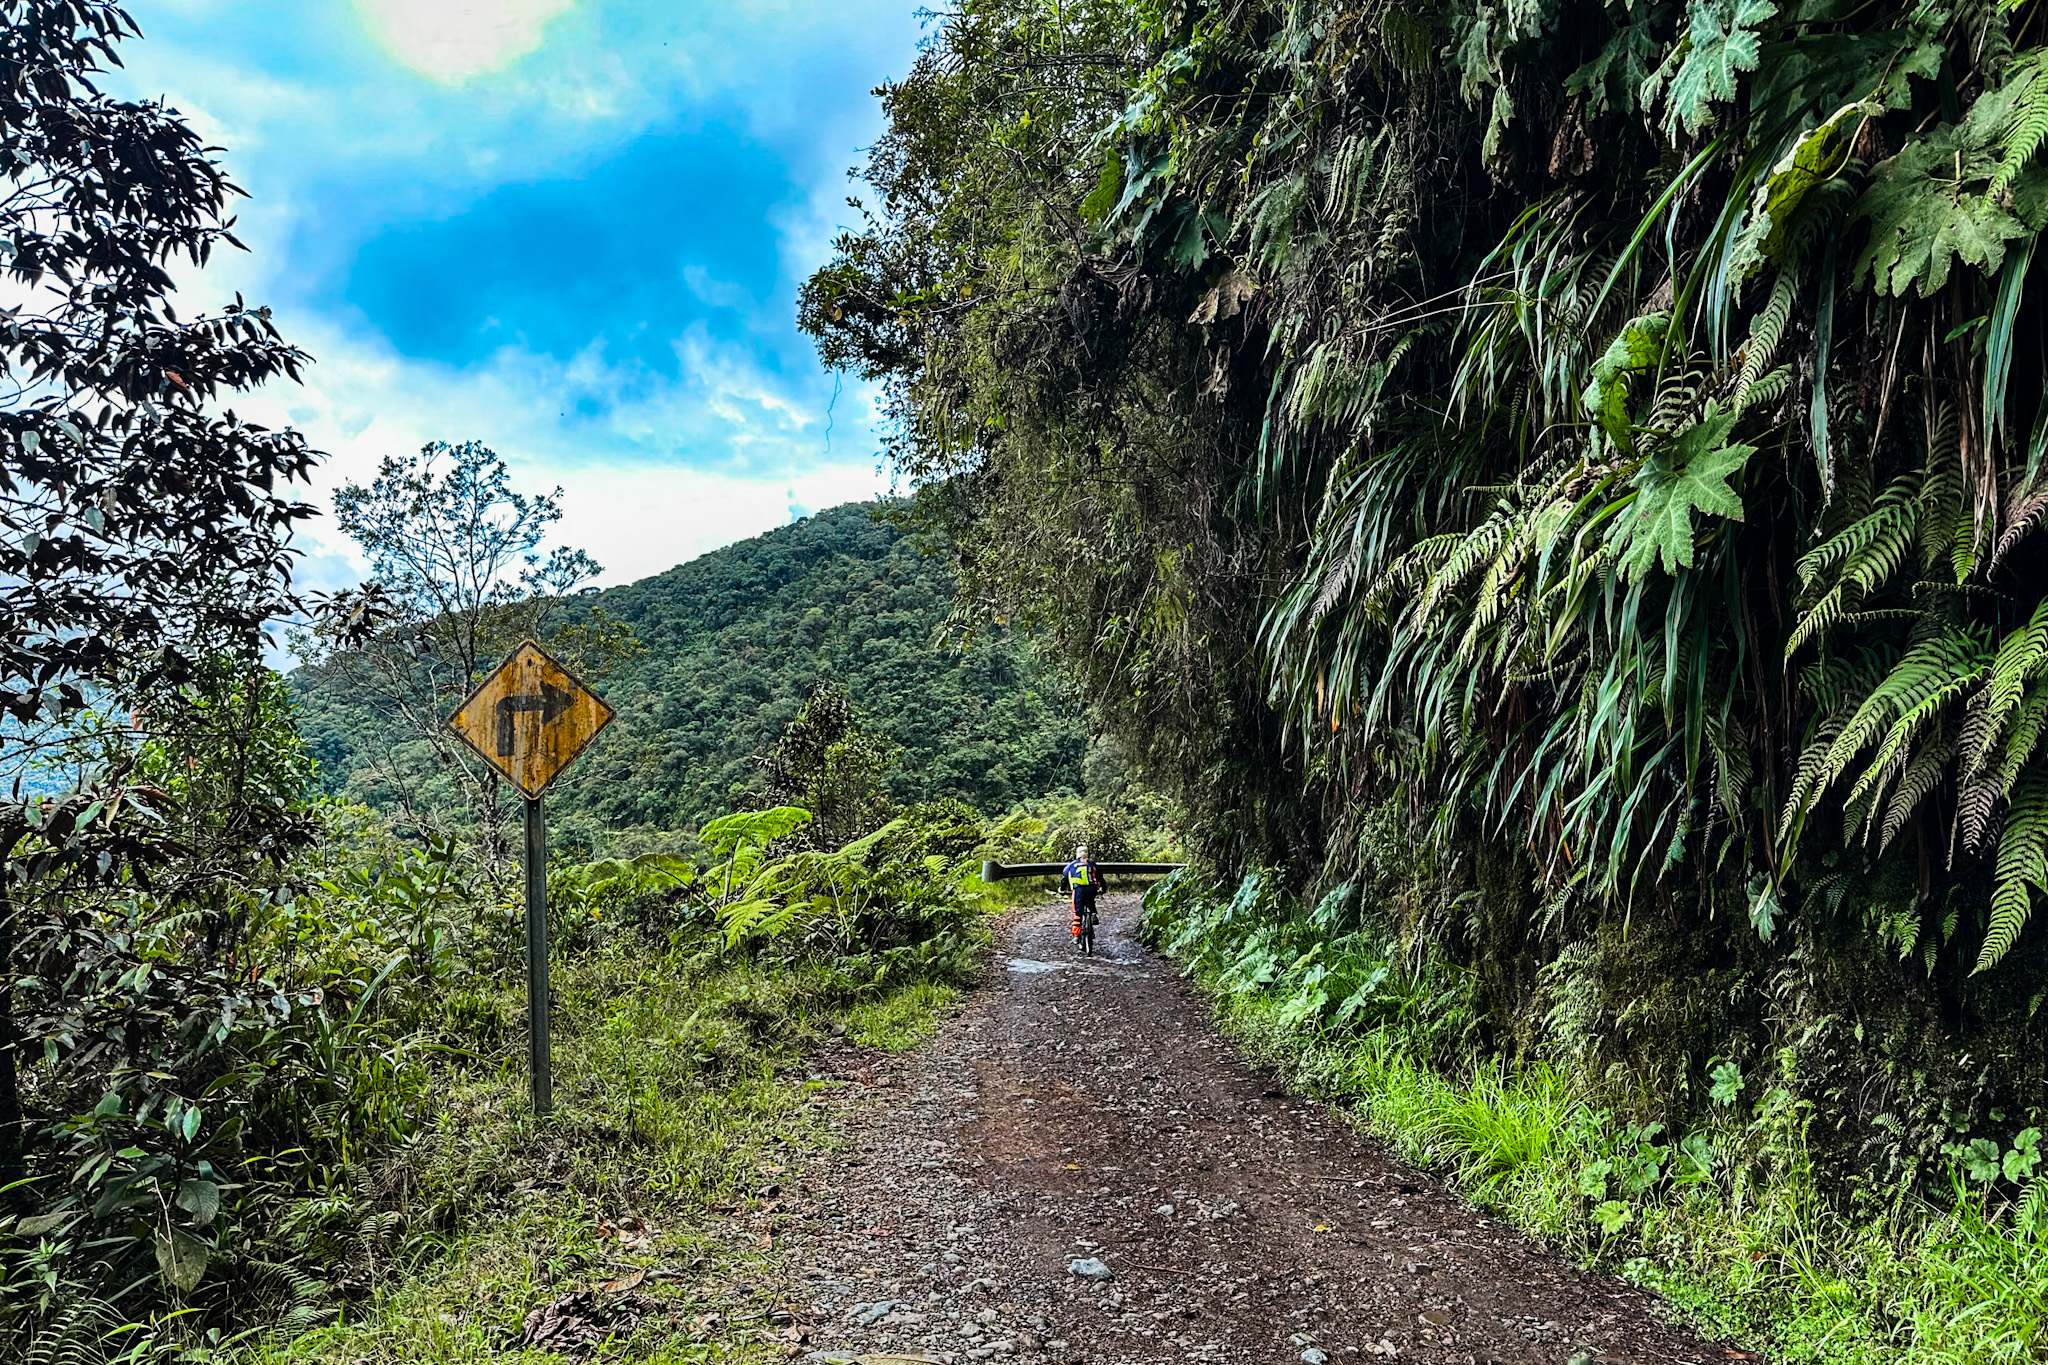 Mountain Biking Death Road in Bolivia: Biking down the once most dangerous road in the world